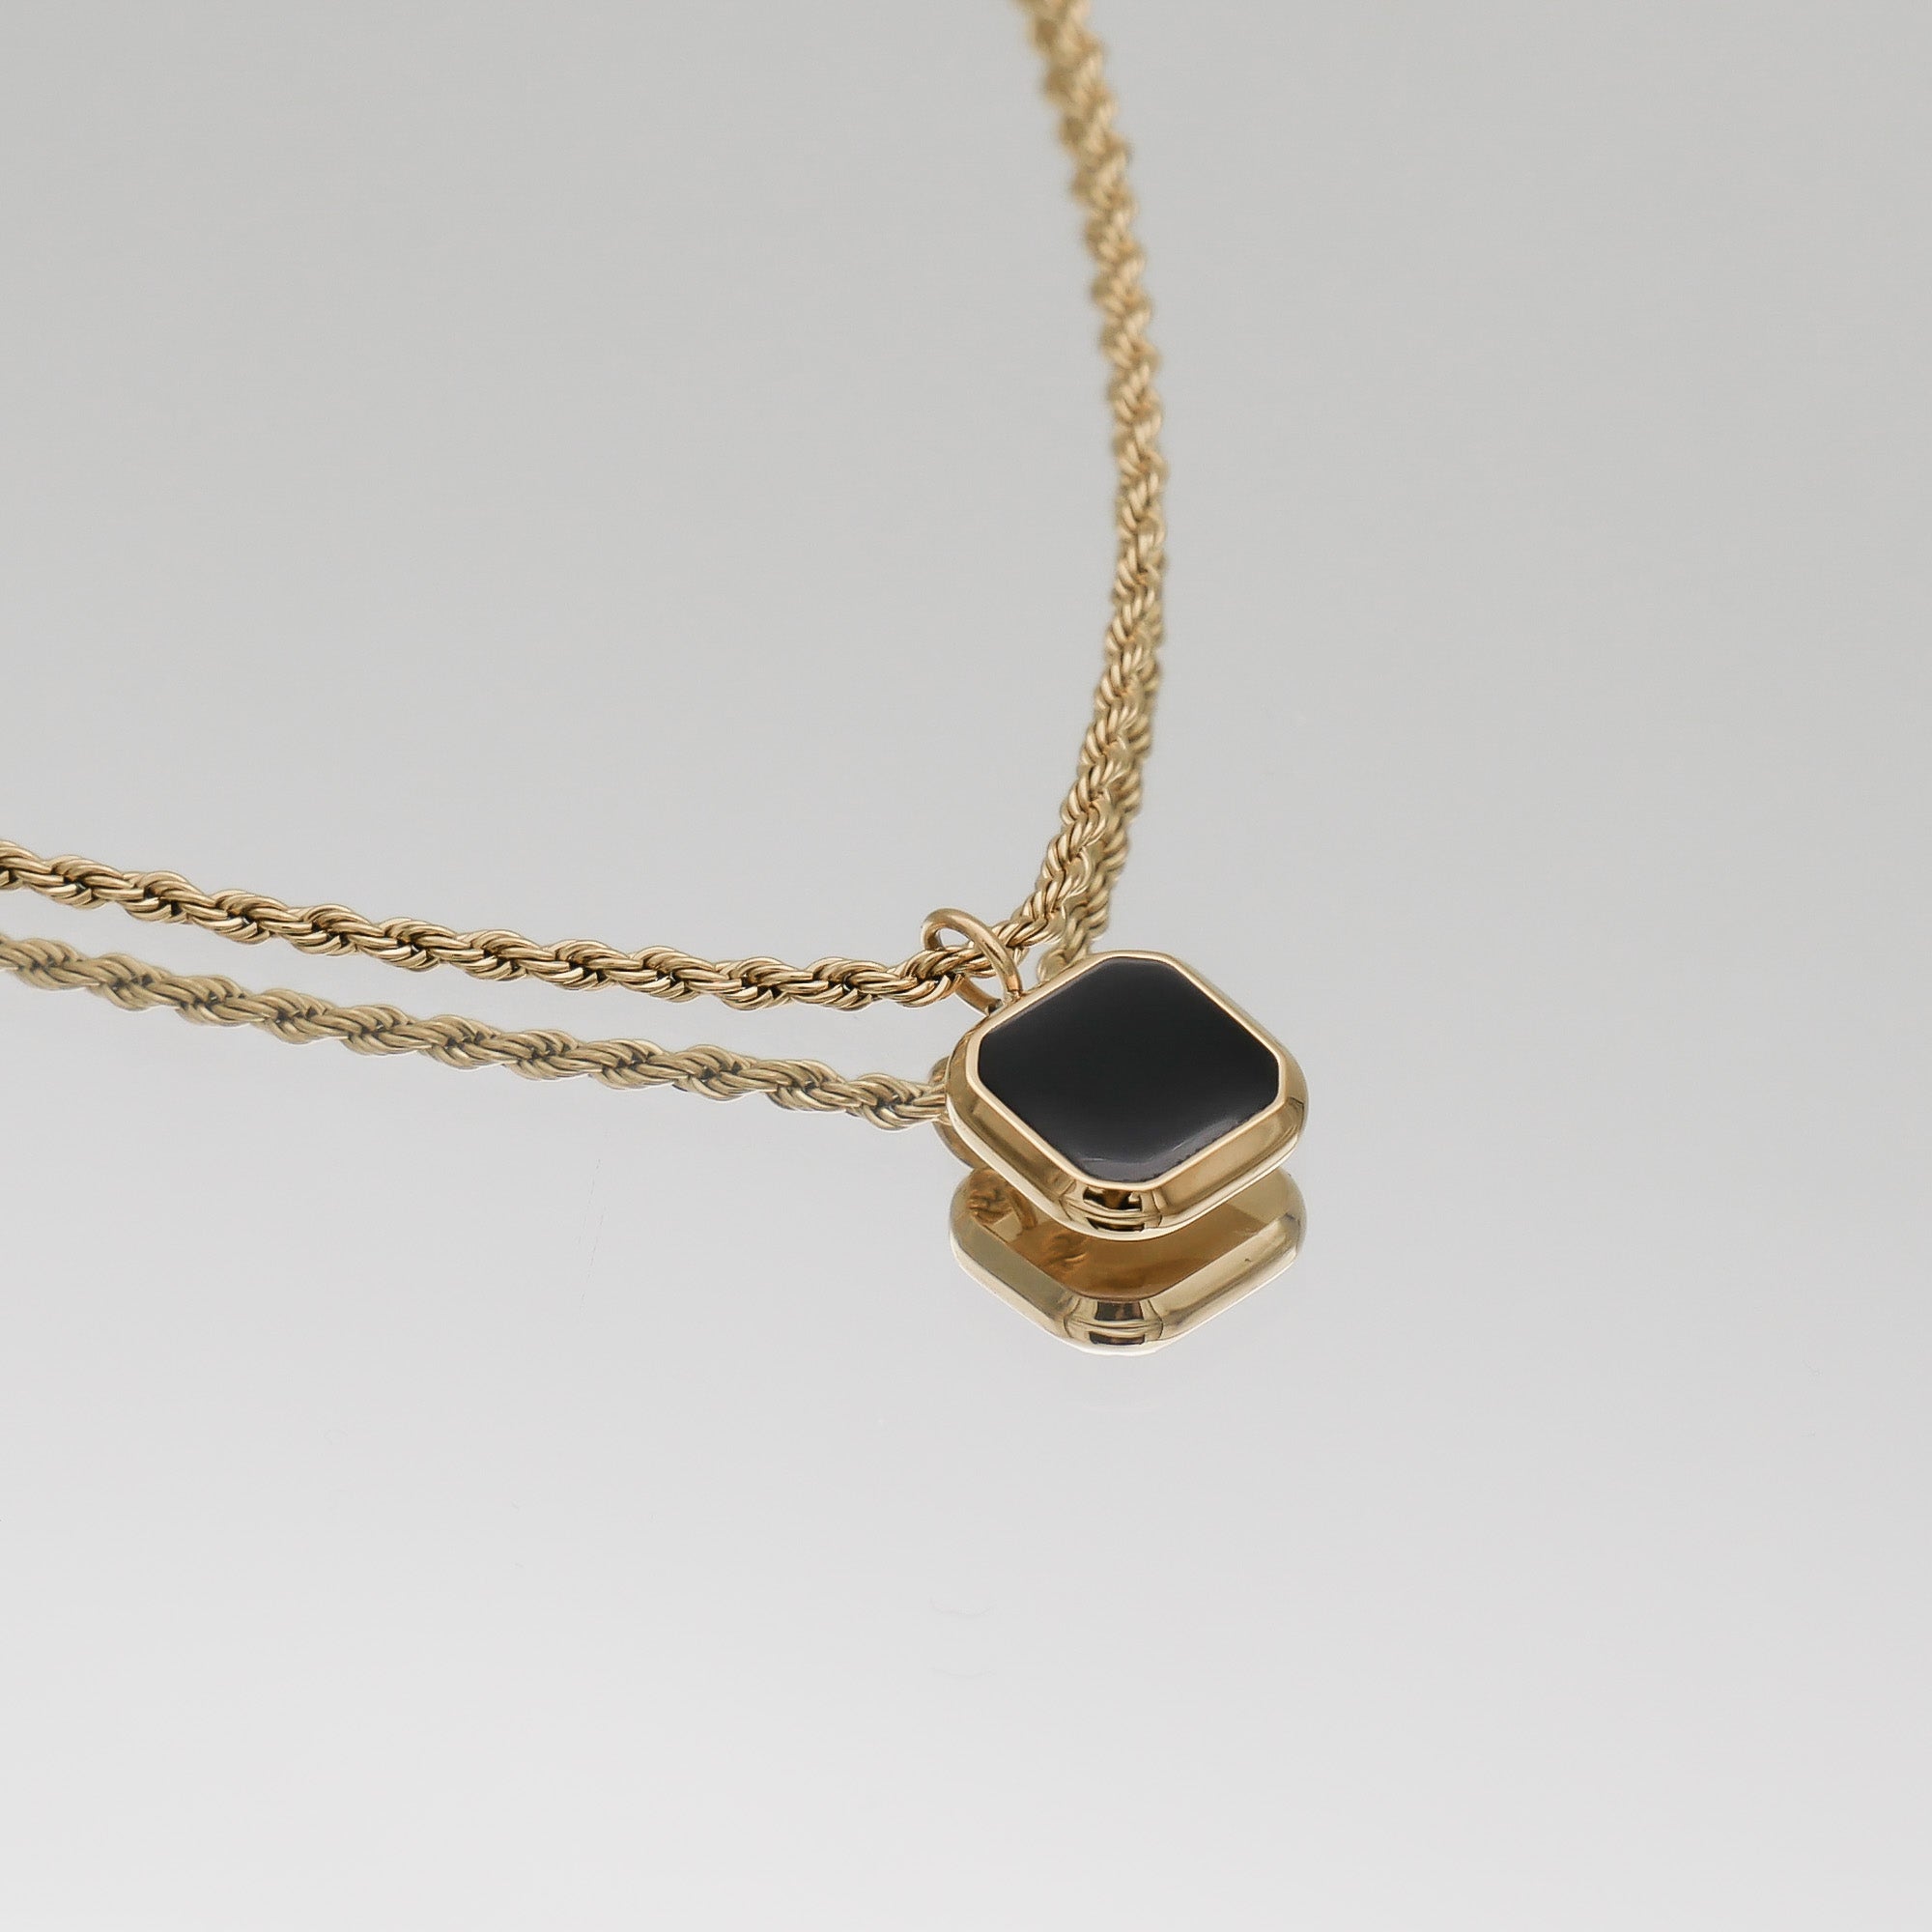 Zola Onyx Pendant Necklace with twisted rope chain